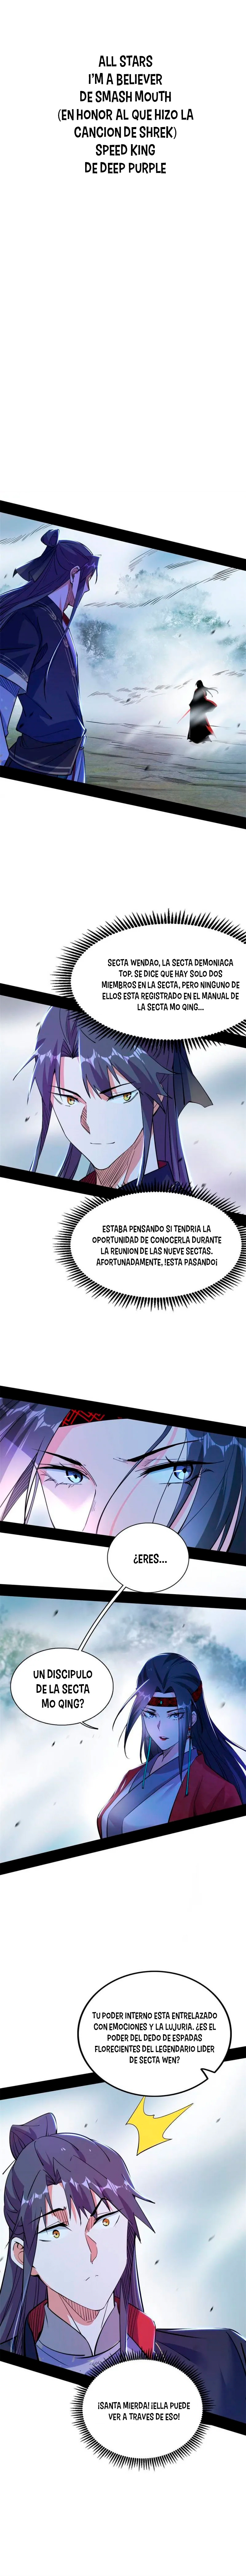 Manga Soy un dios maligno Chapter 315 image number 6